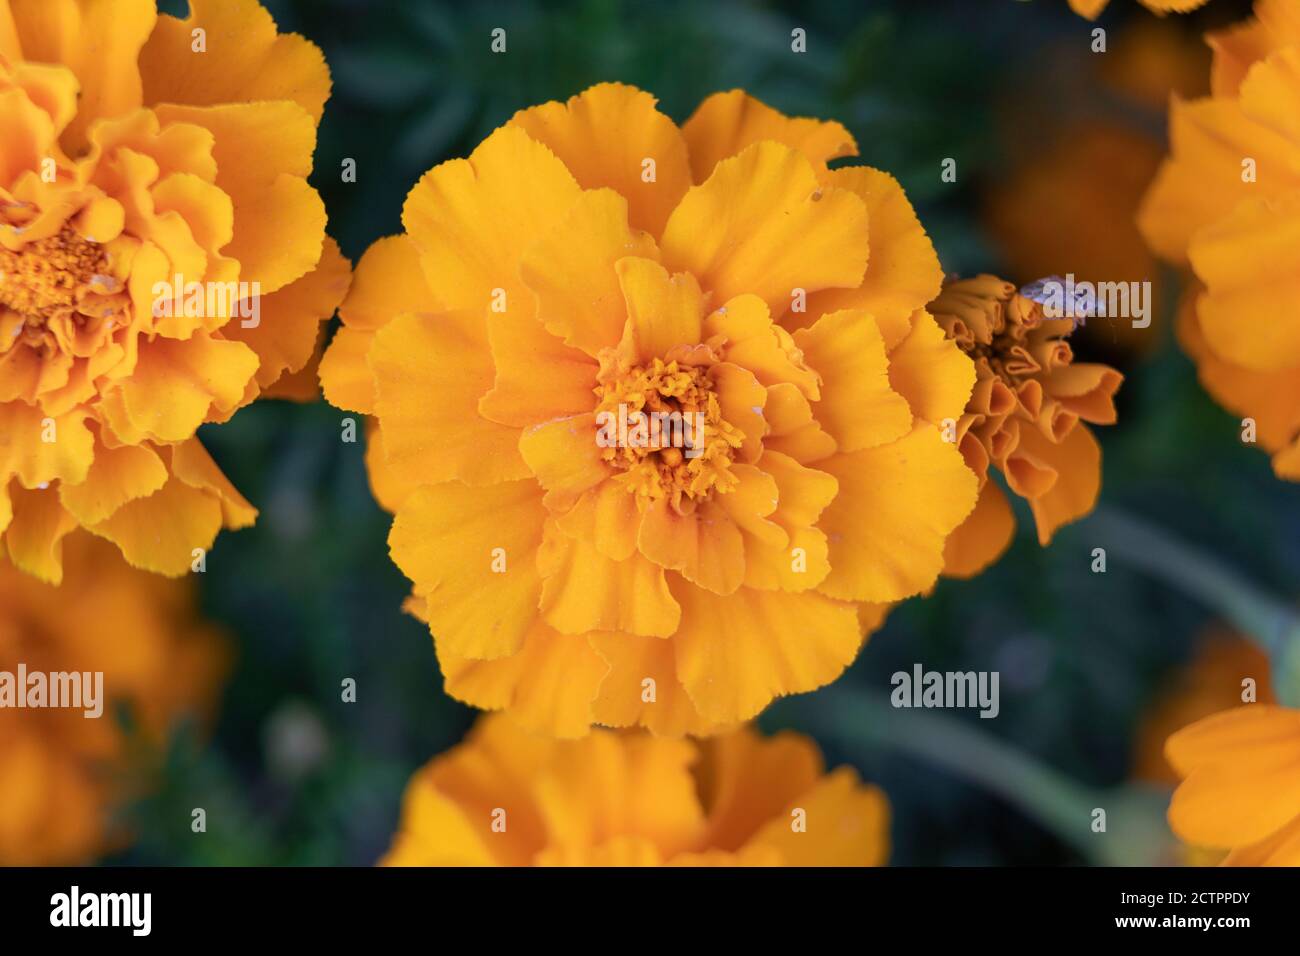 Tagetes Patula, Dwarf Anenome French Marigold, a golden orange coloured French Marigold flower from the family Asteraceae Stock Photo